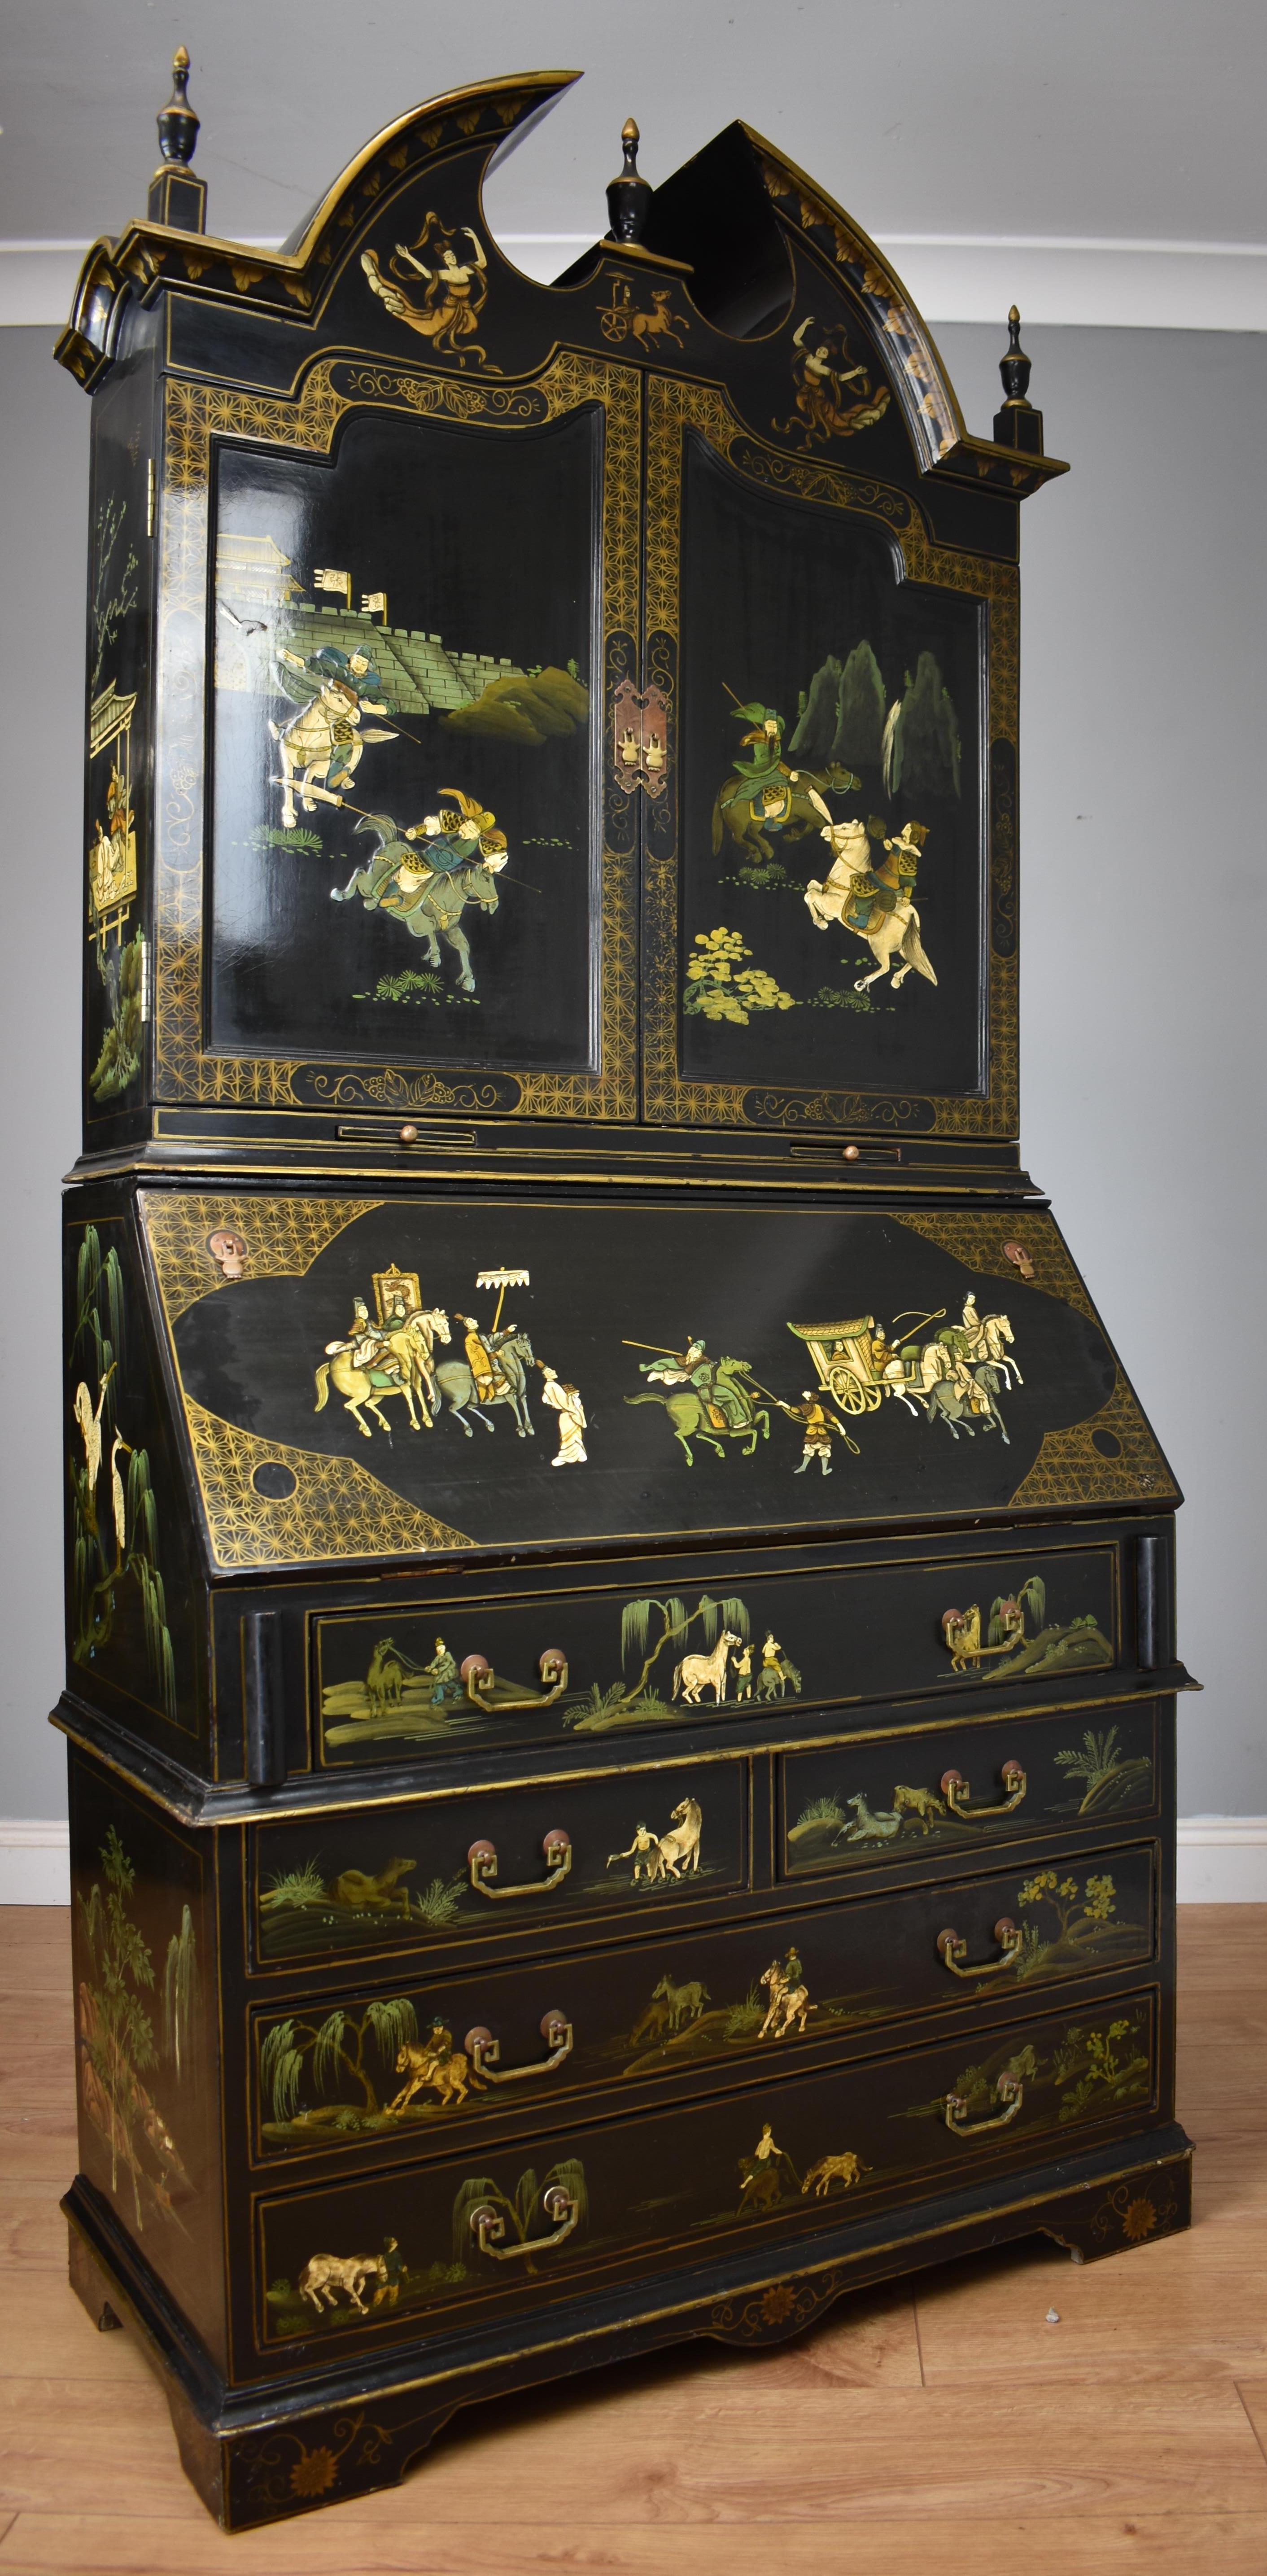 For sale is a good quality chinoiserie 20th century secretery bookcase with pediment top and detailed chinoiserie work to the top and base section front and sides. When the doors are opened it reveals a selection of drawers, pigeon holes and book